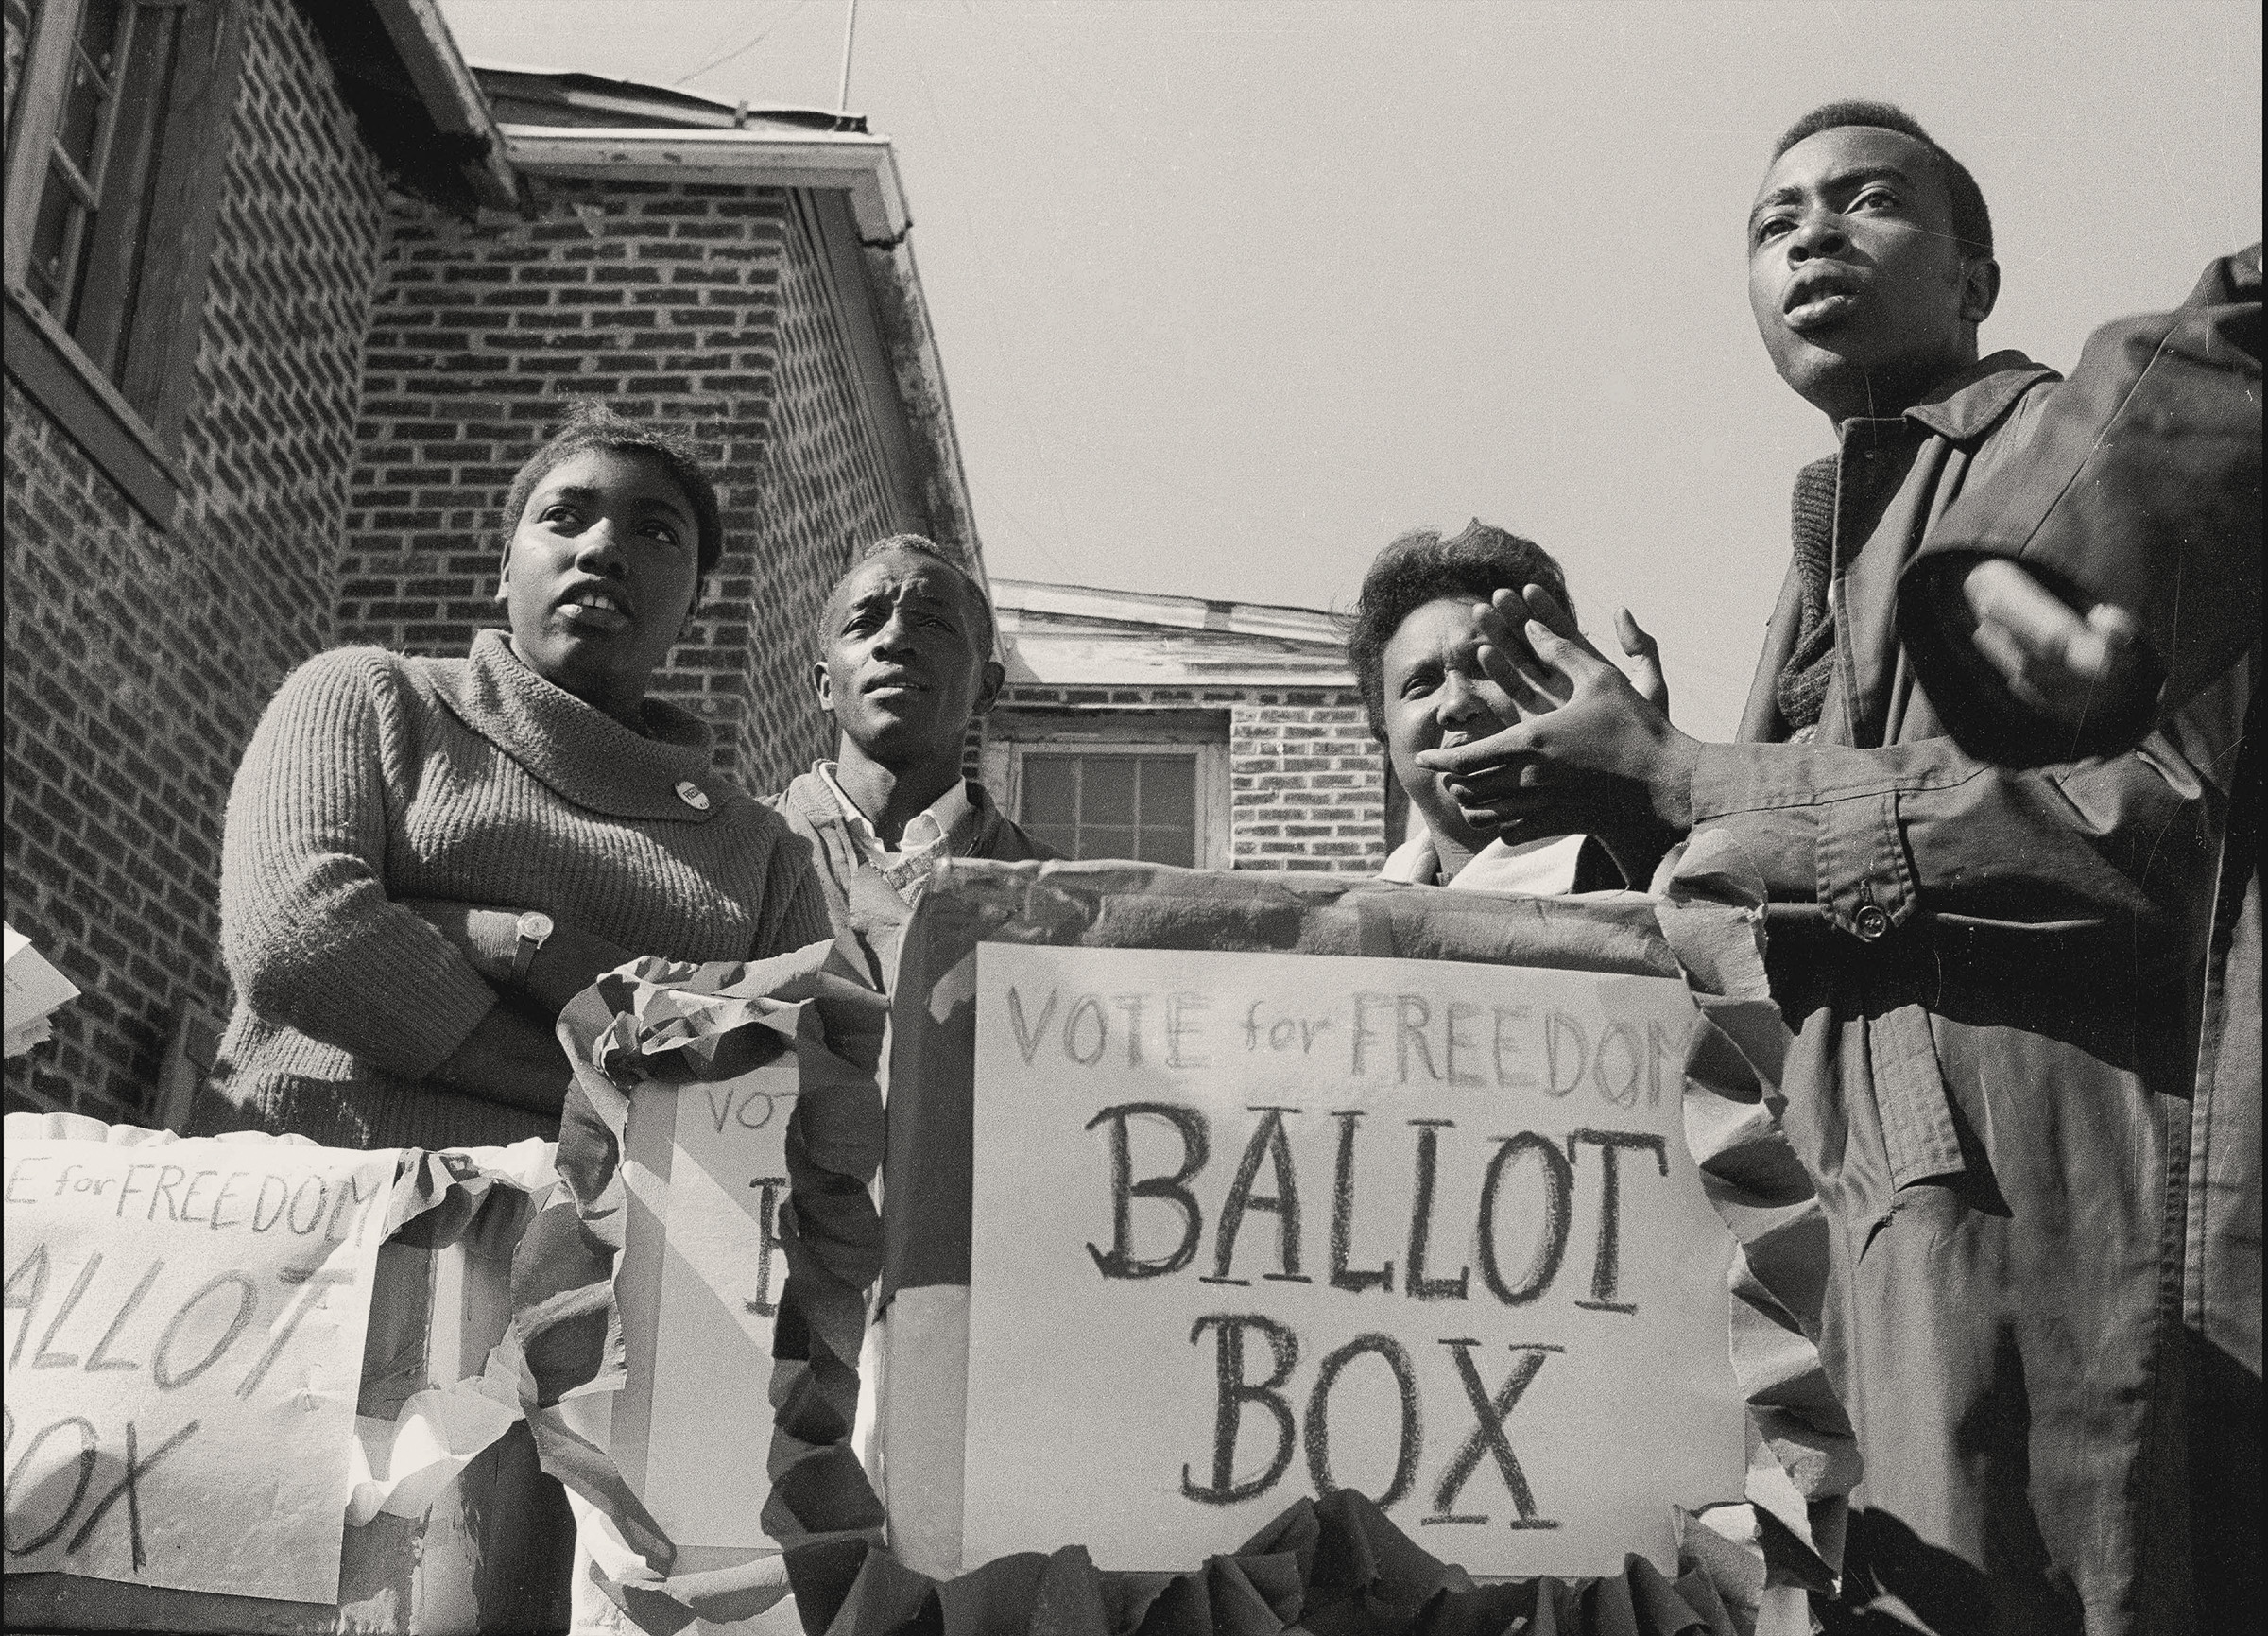 Greenwood Polling Station, October 1963. Photograph by Matt Herron. Because Mississippi whites claimed African Americans were not interested in voting, organizers sponsored a mock election to prove them wrong. Aaron Henry ran for Governor as part of this 